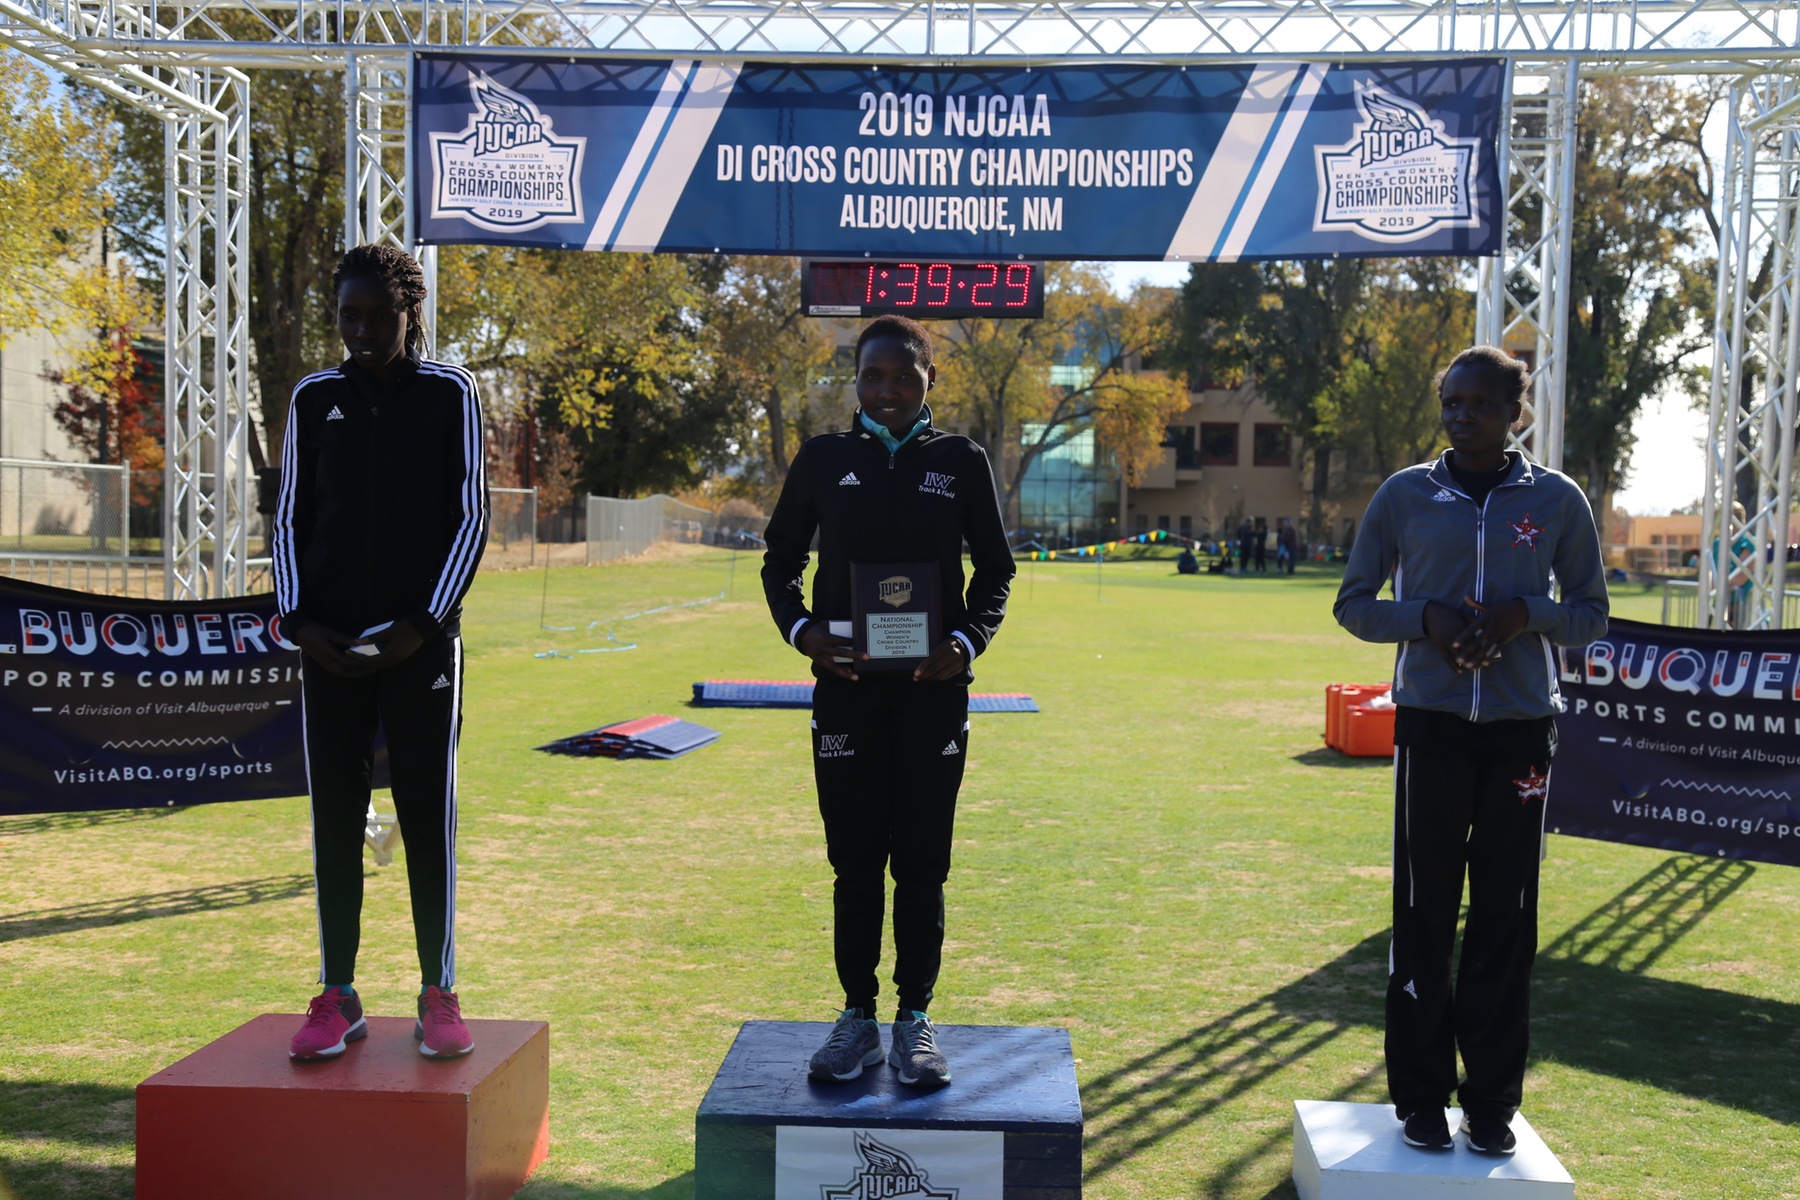 Racing into History, Linga Claims Reivers' First Cross Country National Championship